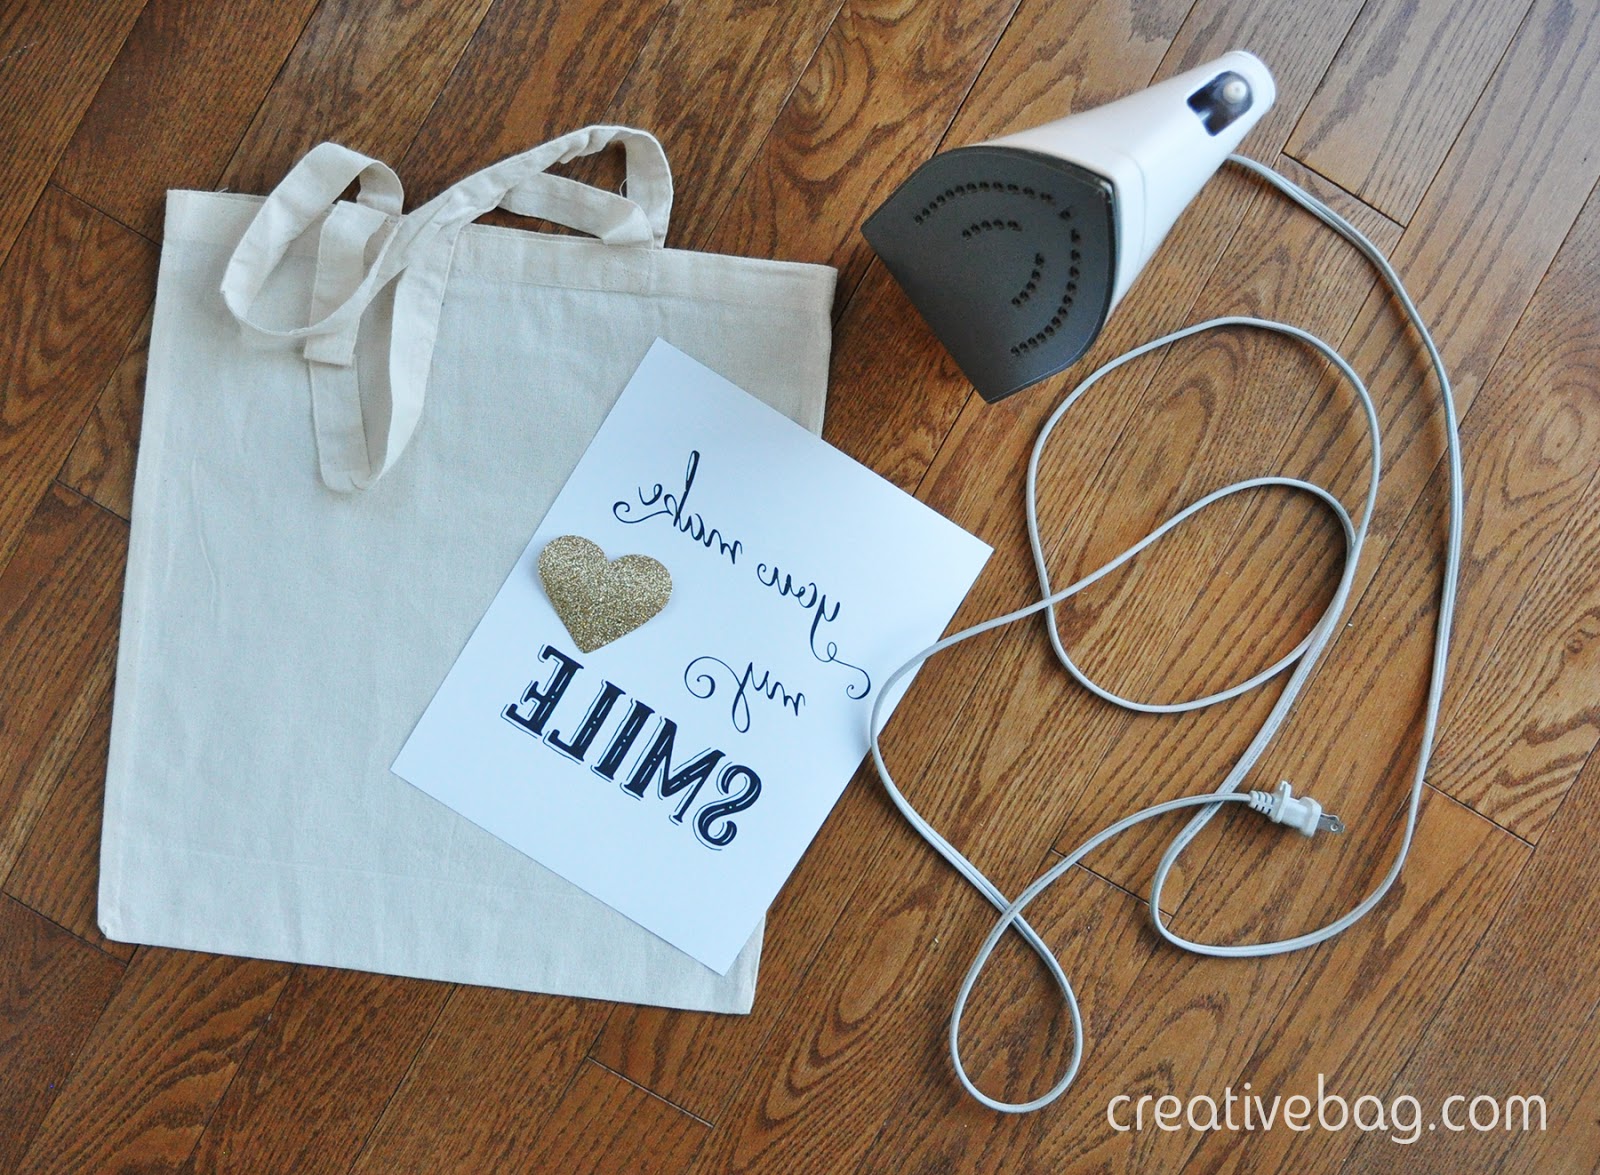 you can do it yourself - customize tote bags | Creative Bag